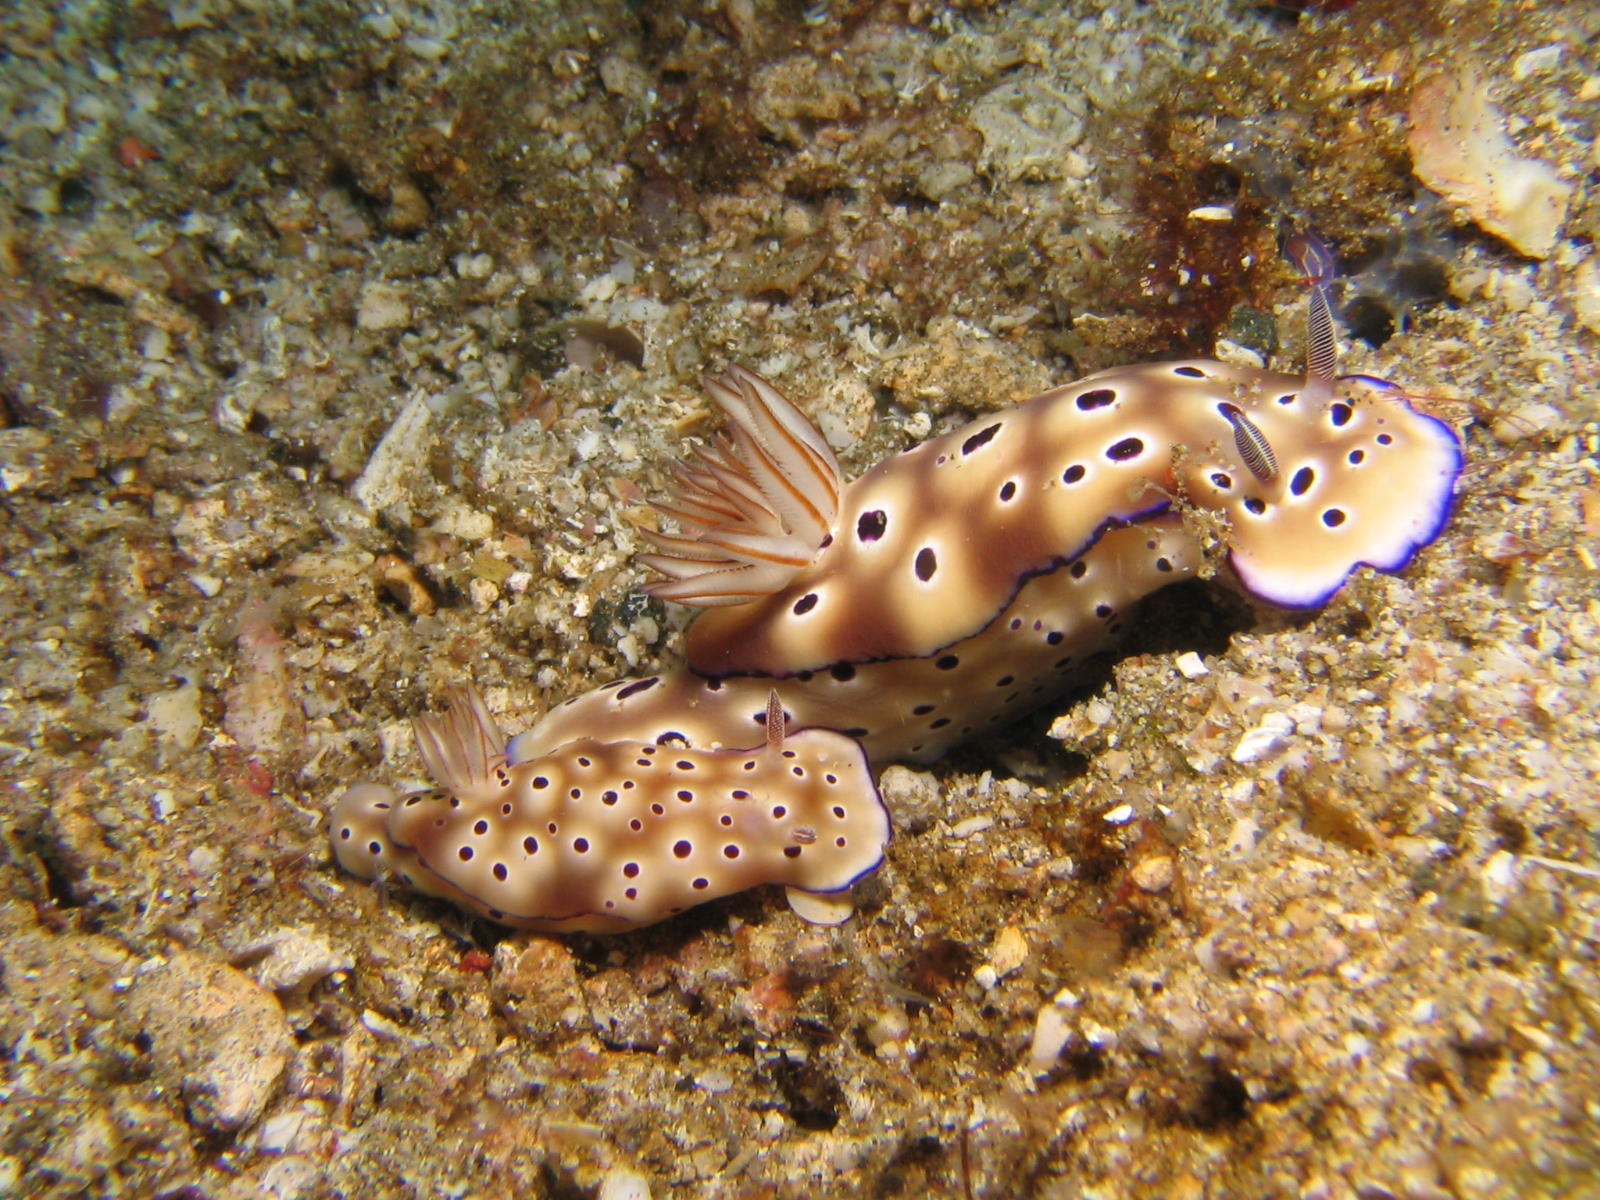 Two Nudibranches